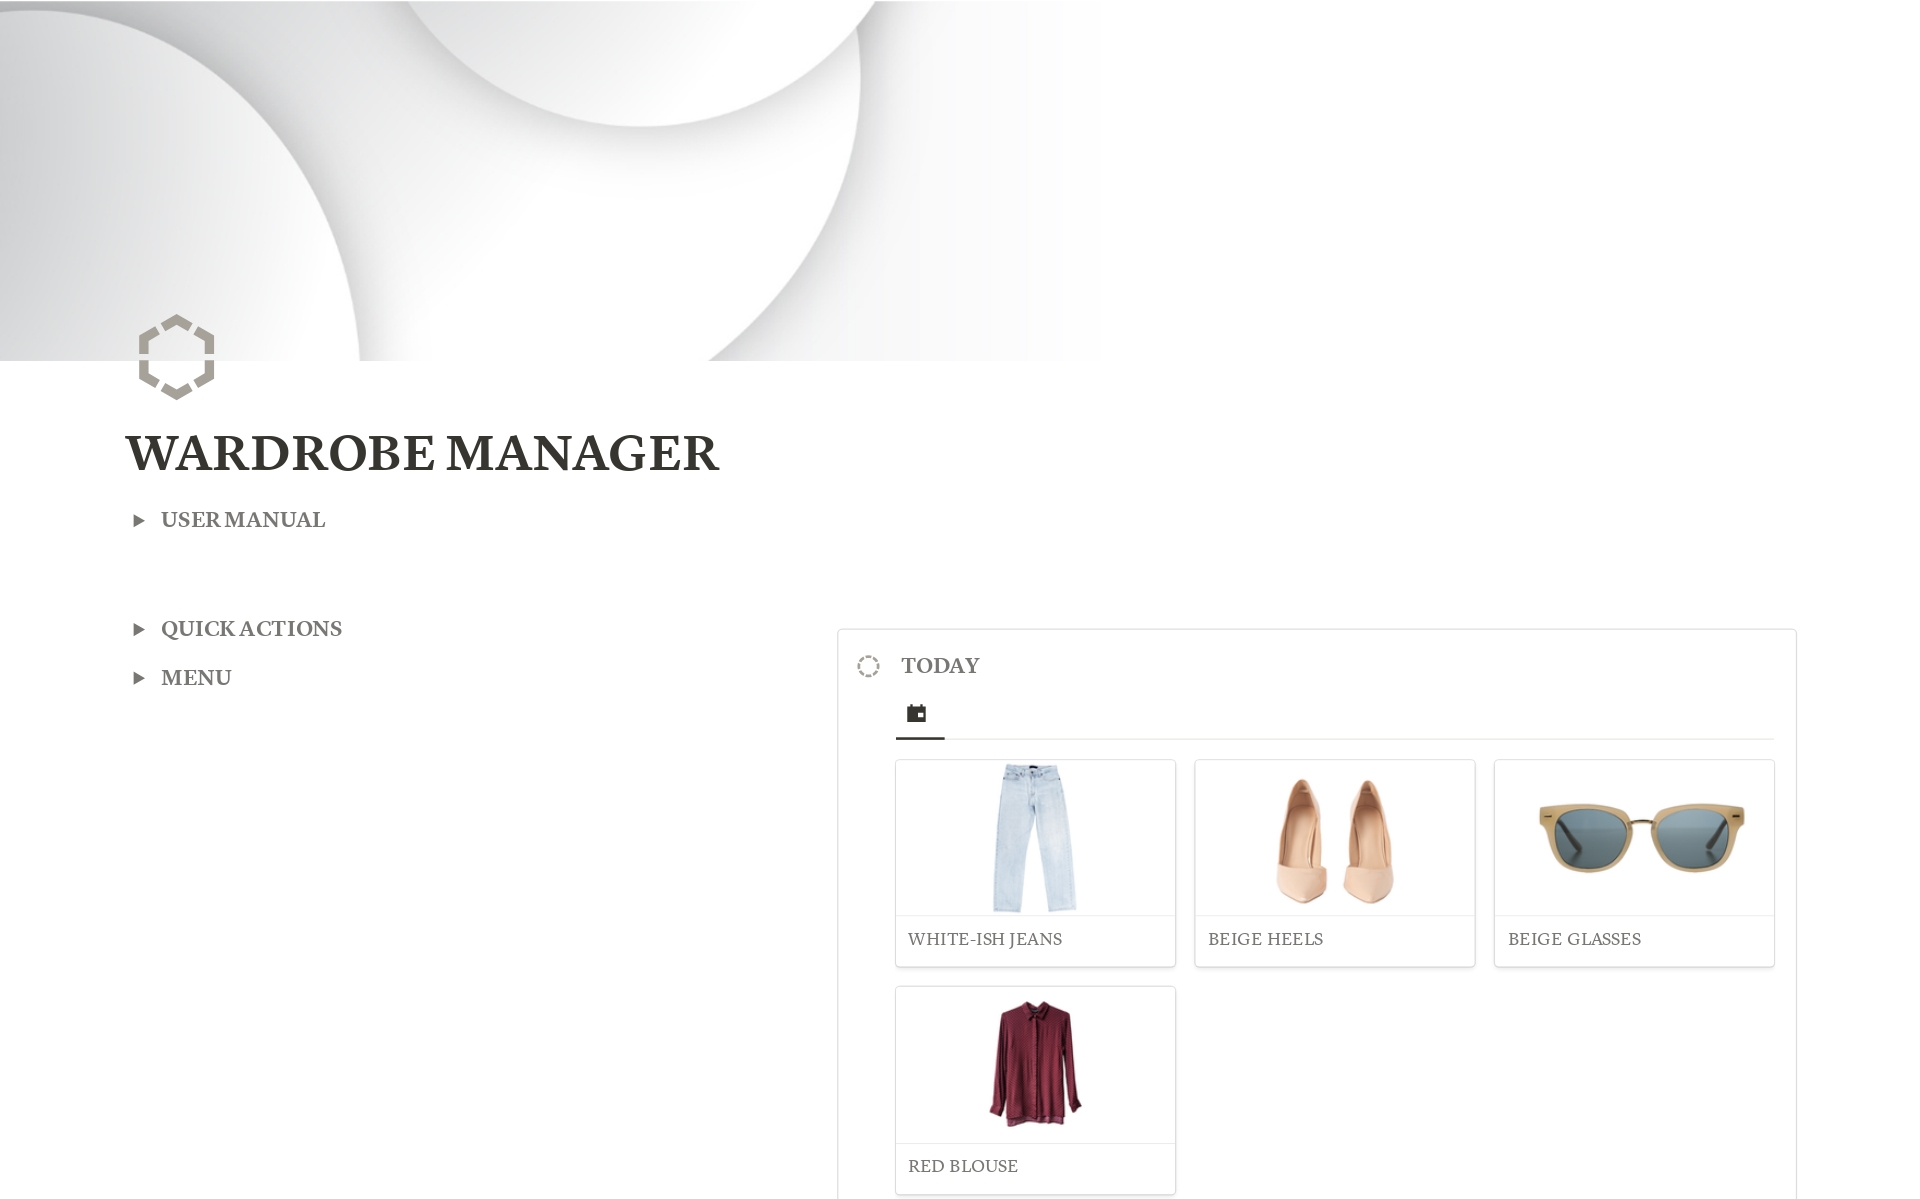 The Notion Wardrobe Manager is a digital assistant for organizing, planning, and reflecting on your wardrobe.